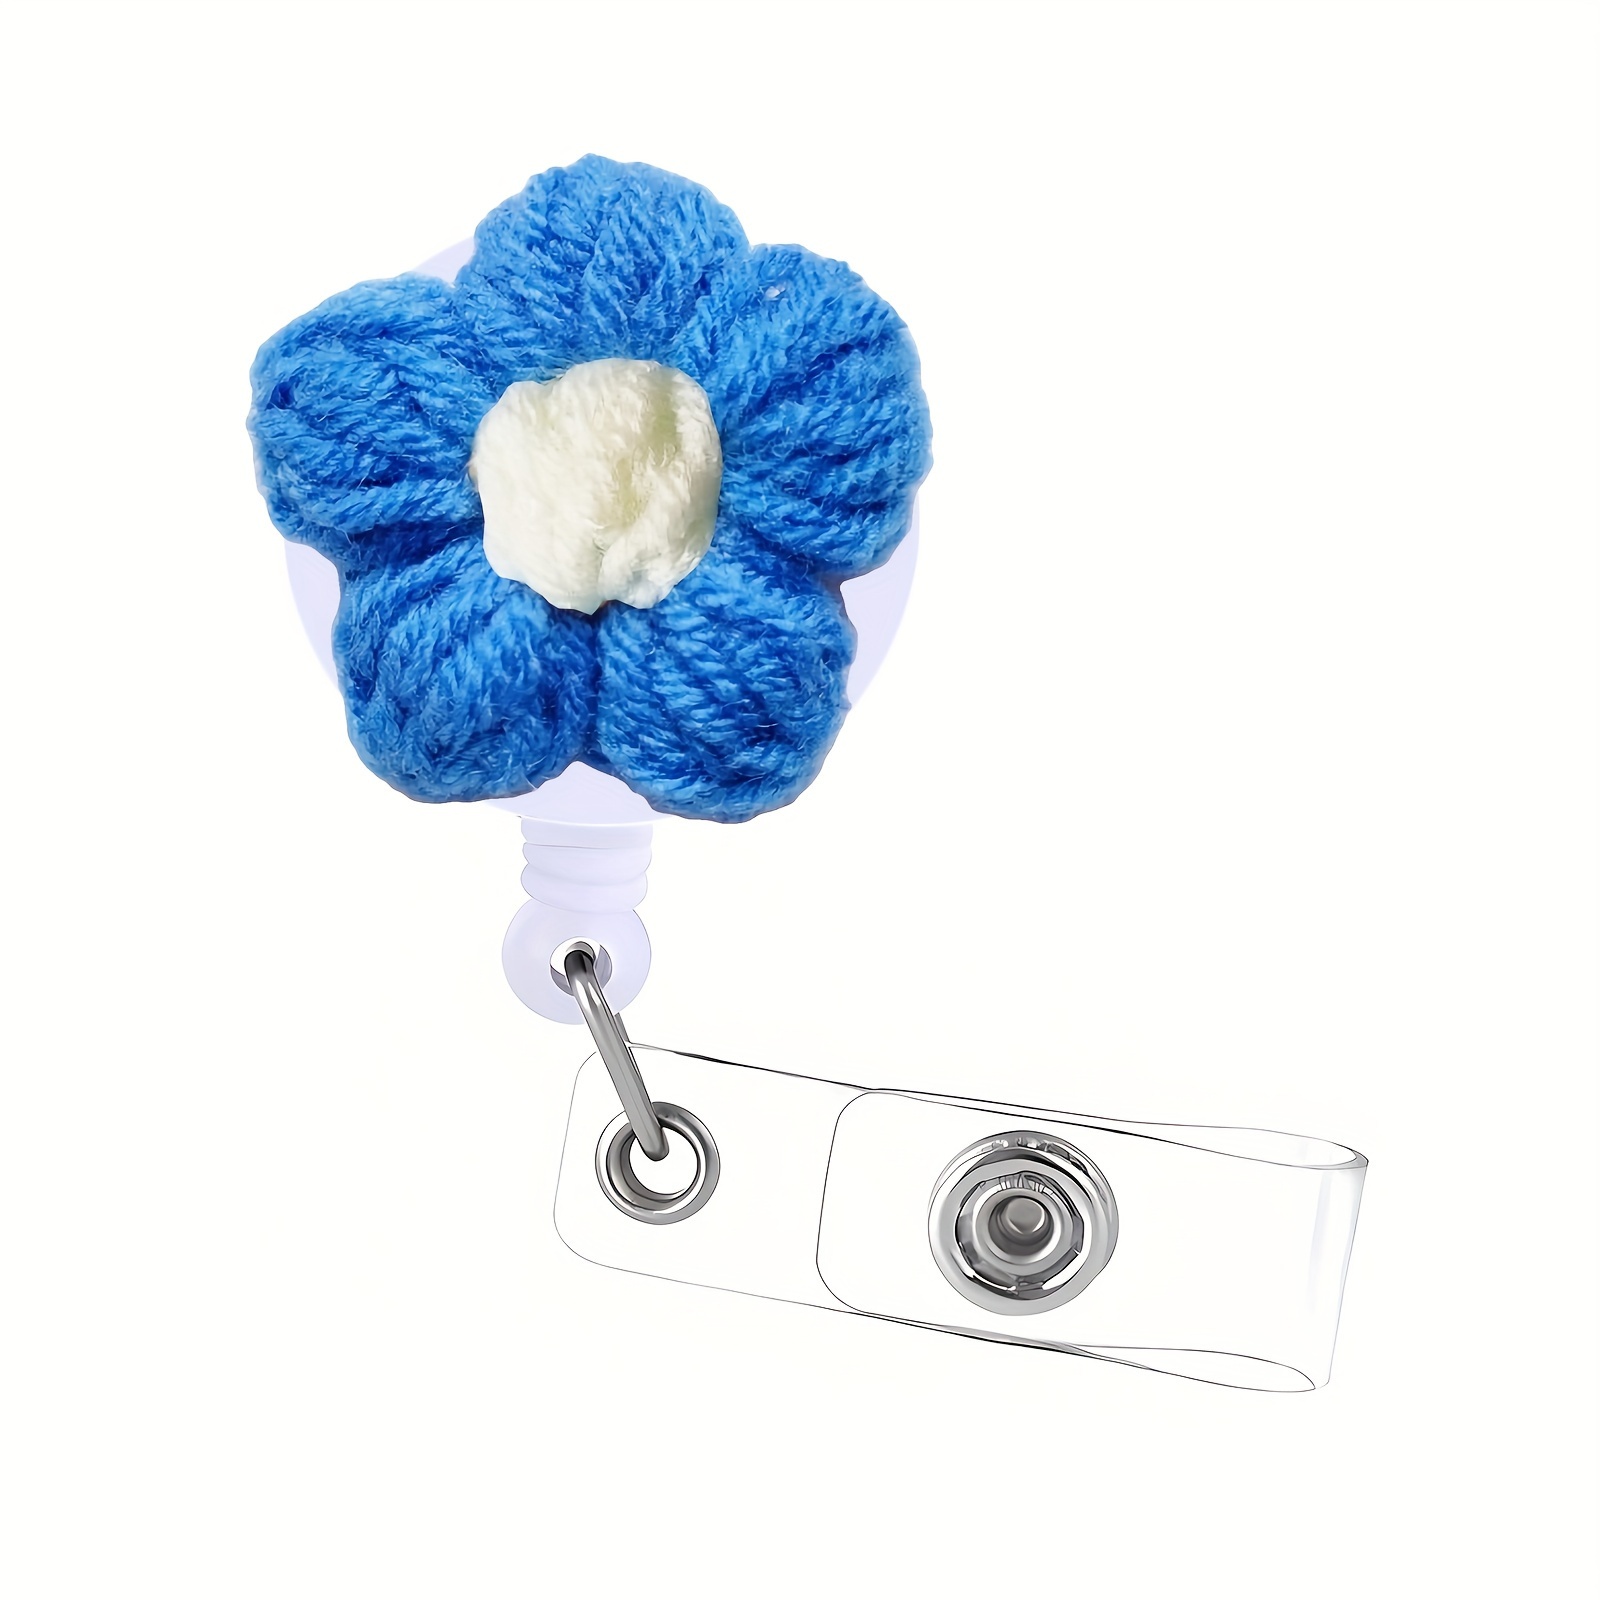 Badge Reels Holder Retractable with ID Clip for Nurse Name Tag